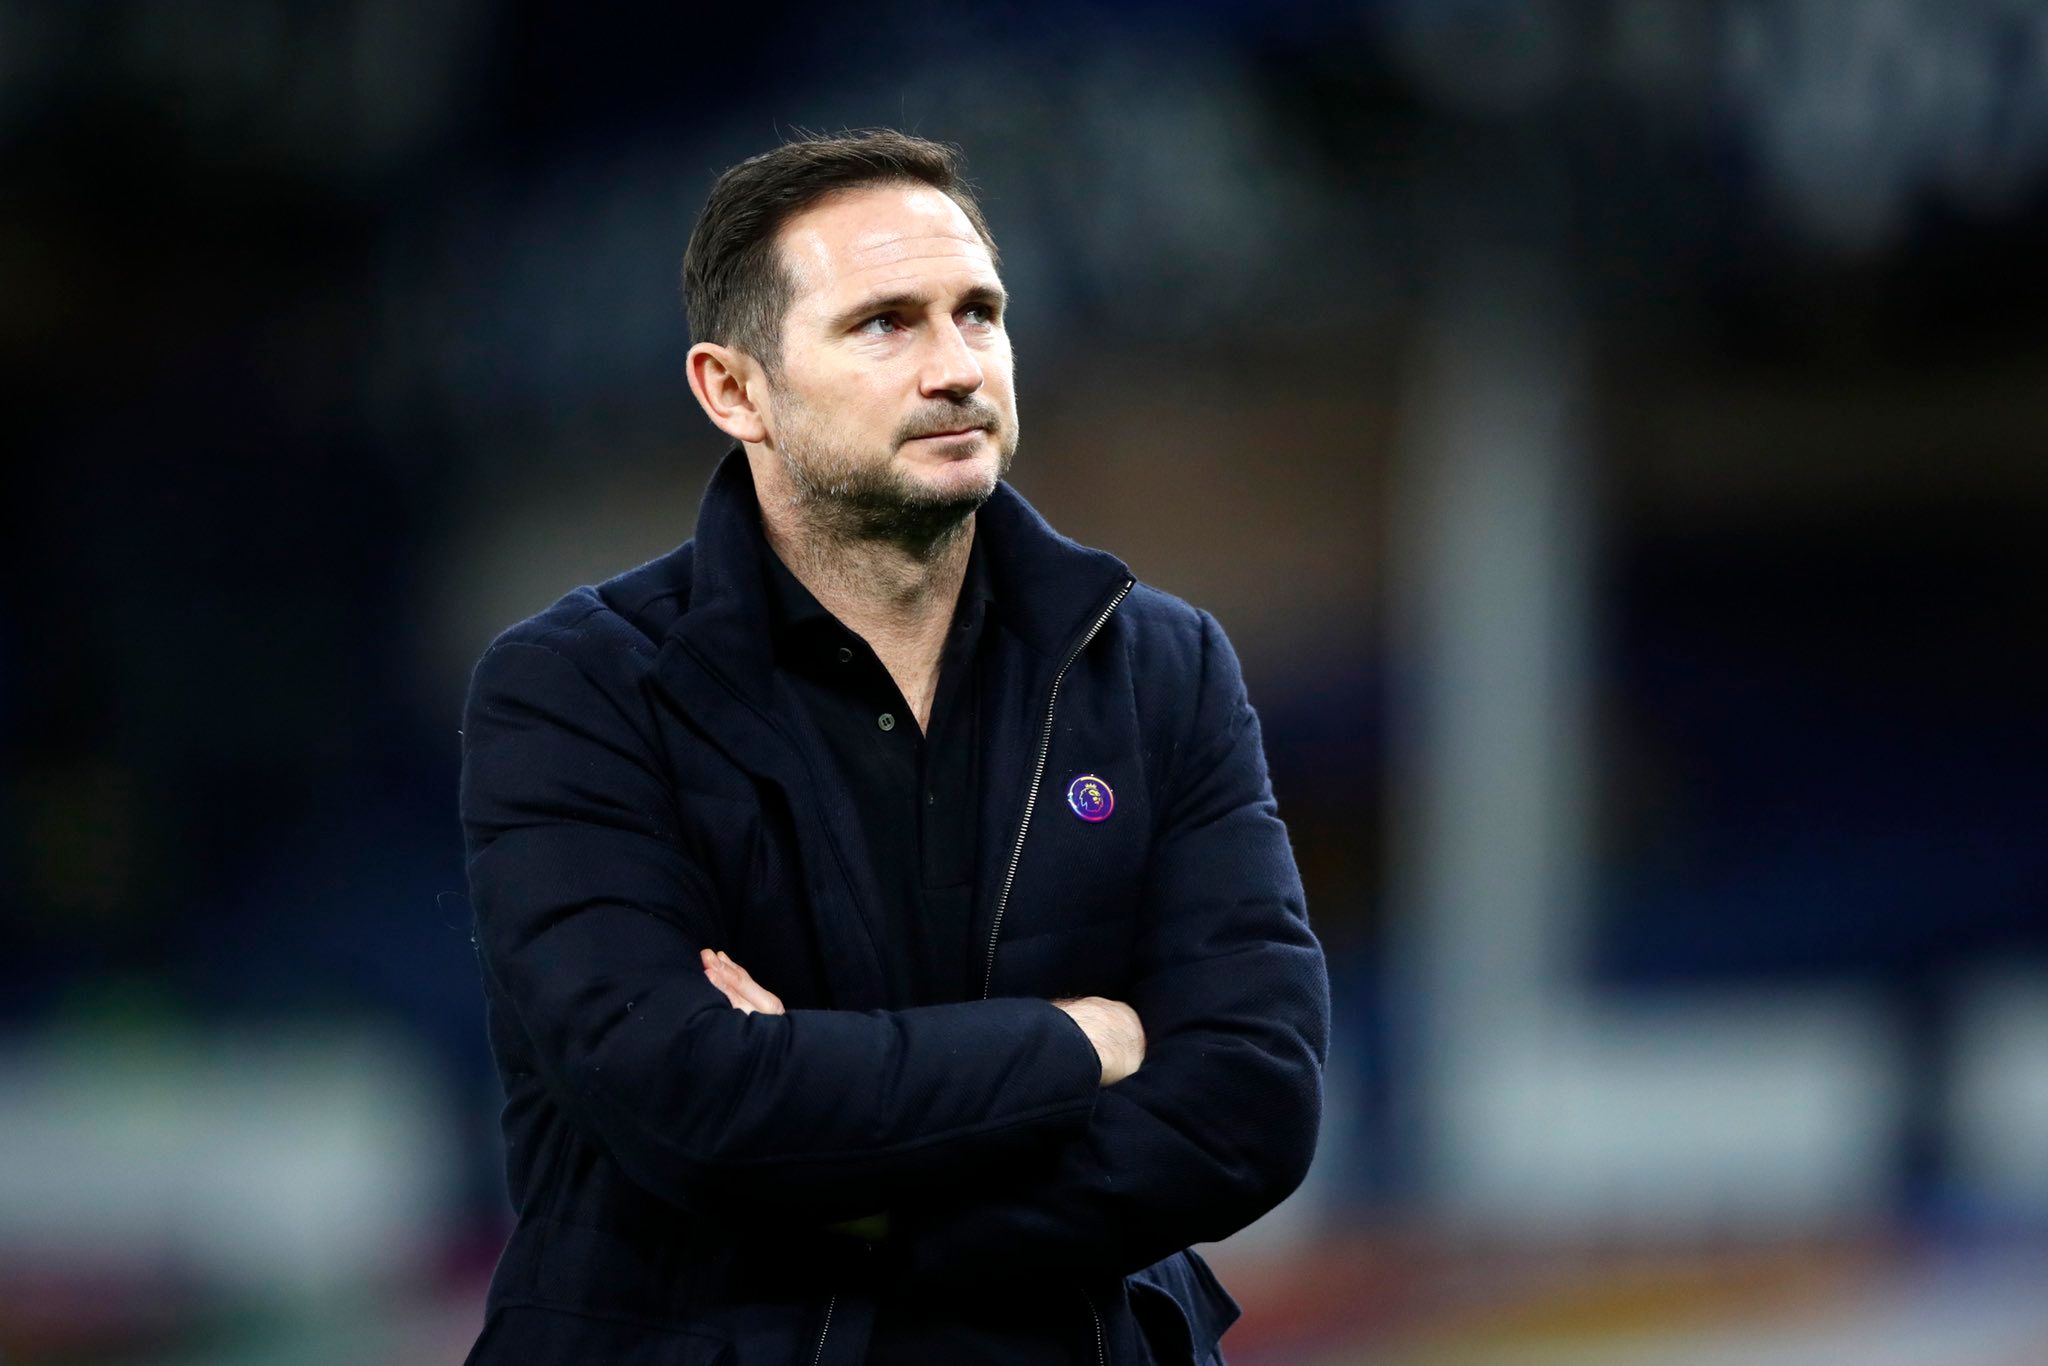 Everton appoint Frank Lampard as manager to replace Rafael Benitez